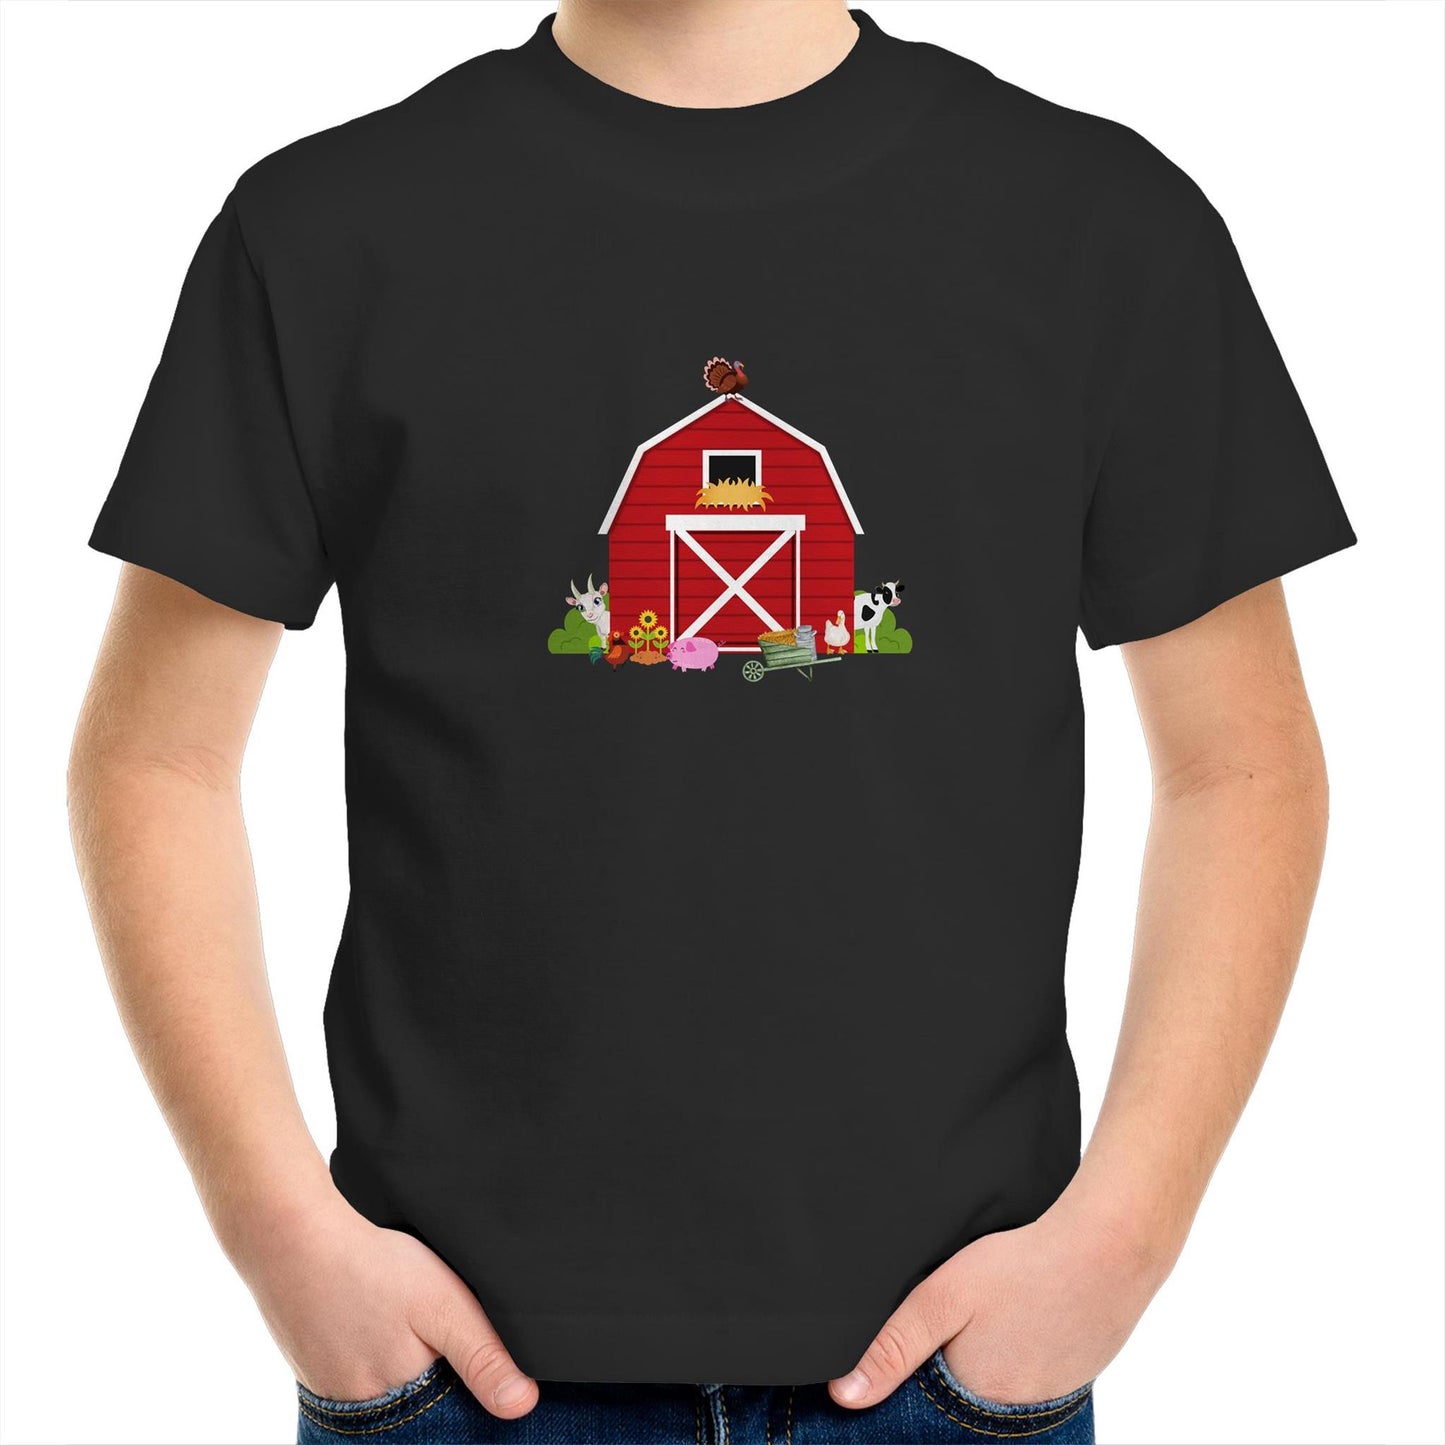 Red Farmhouse Kids Youth Crew T-Shirt